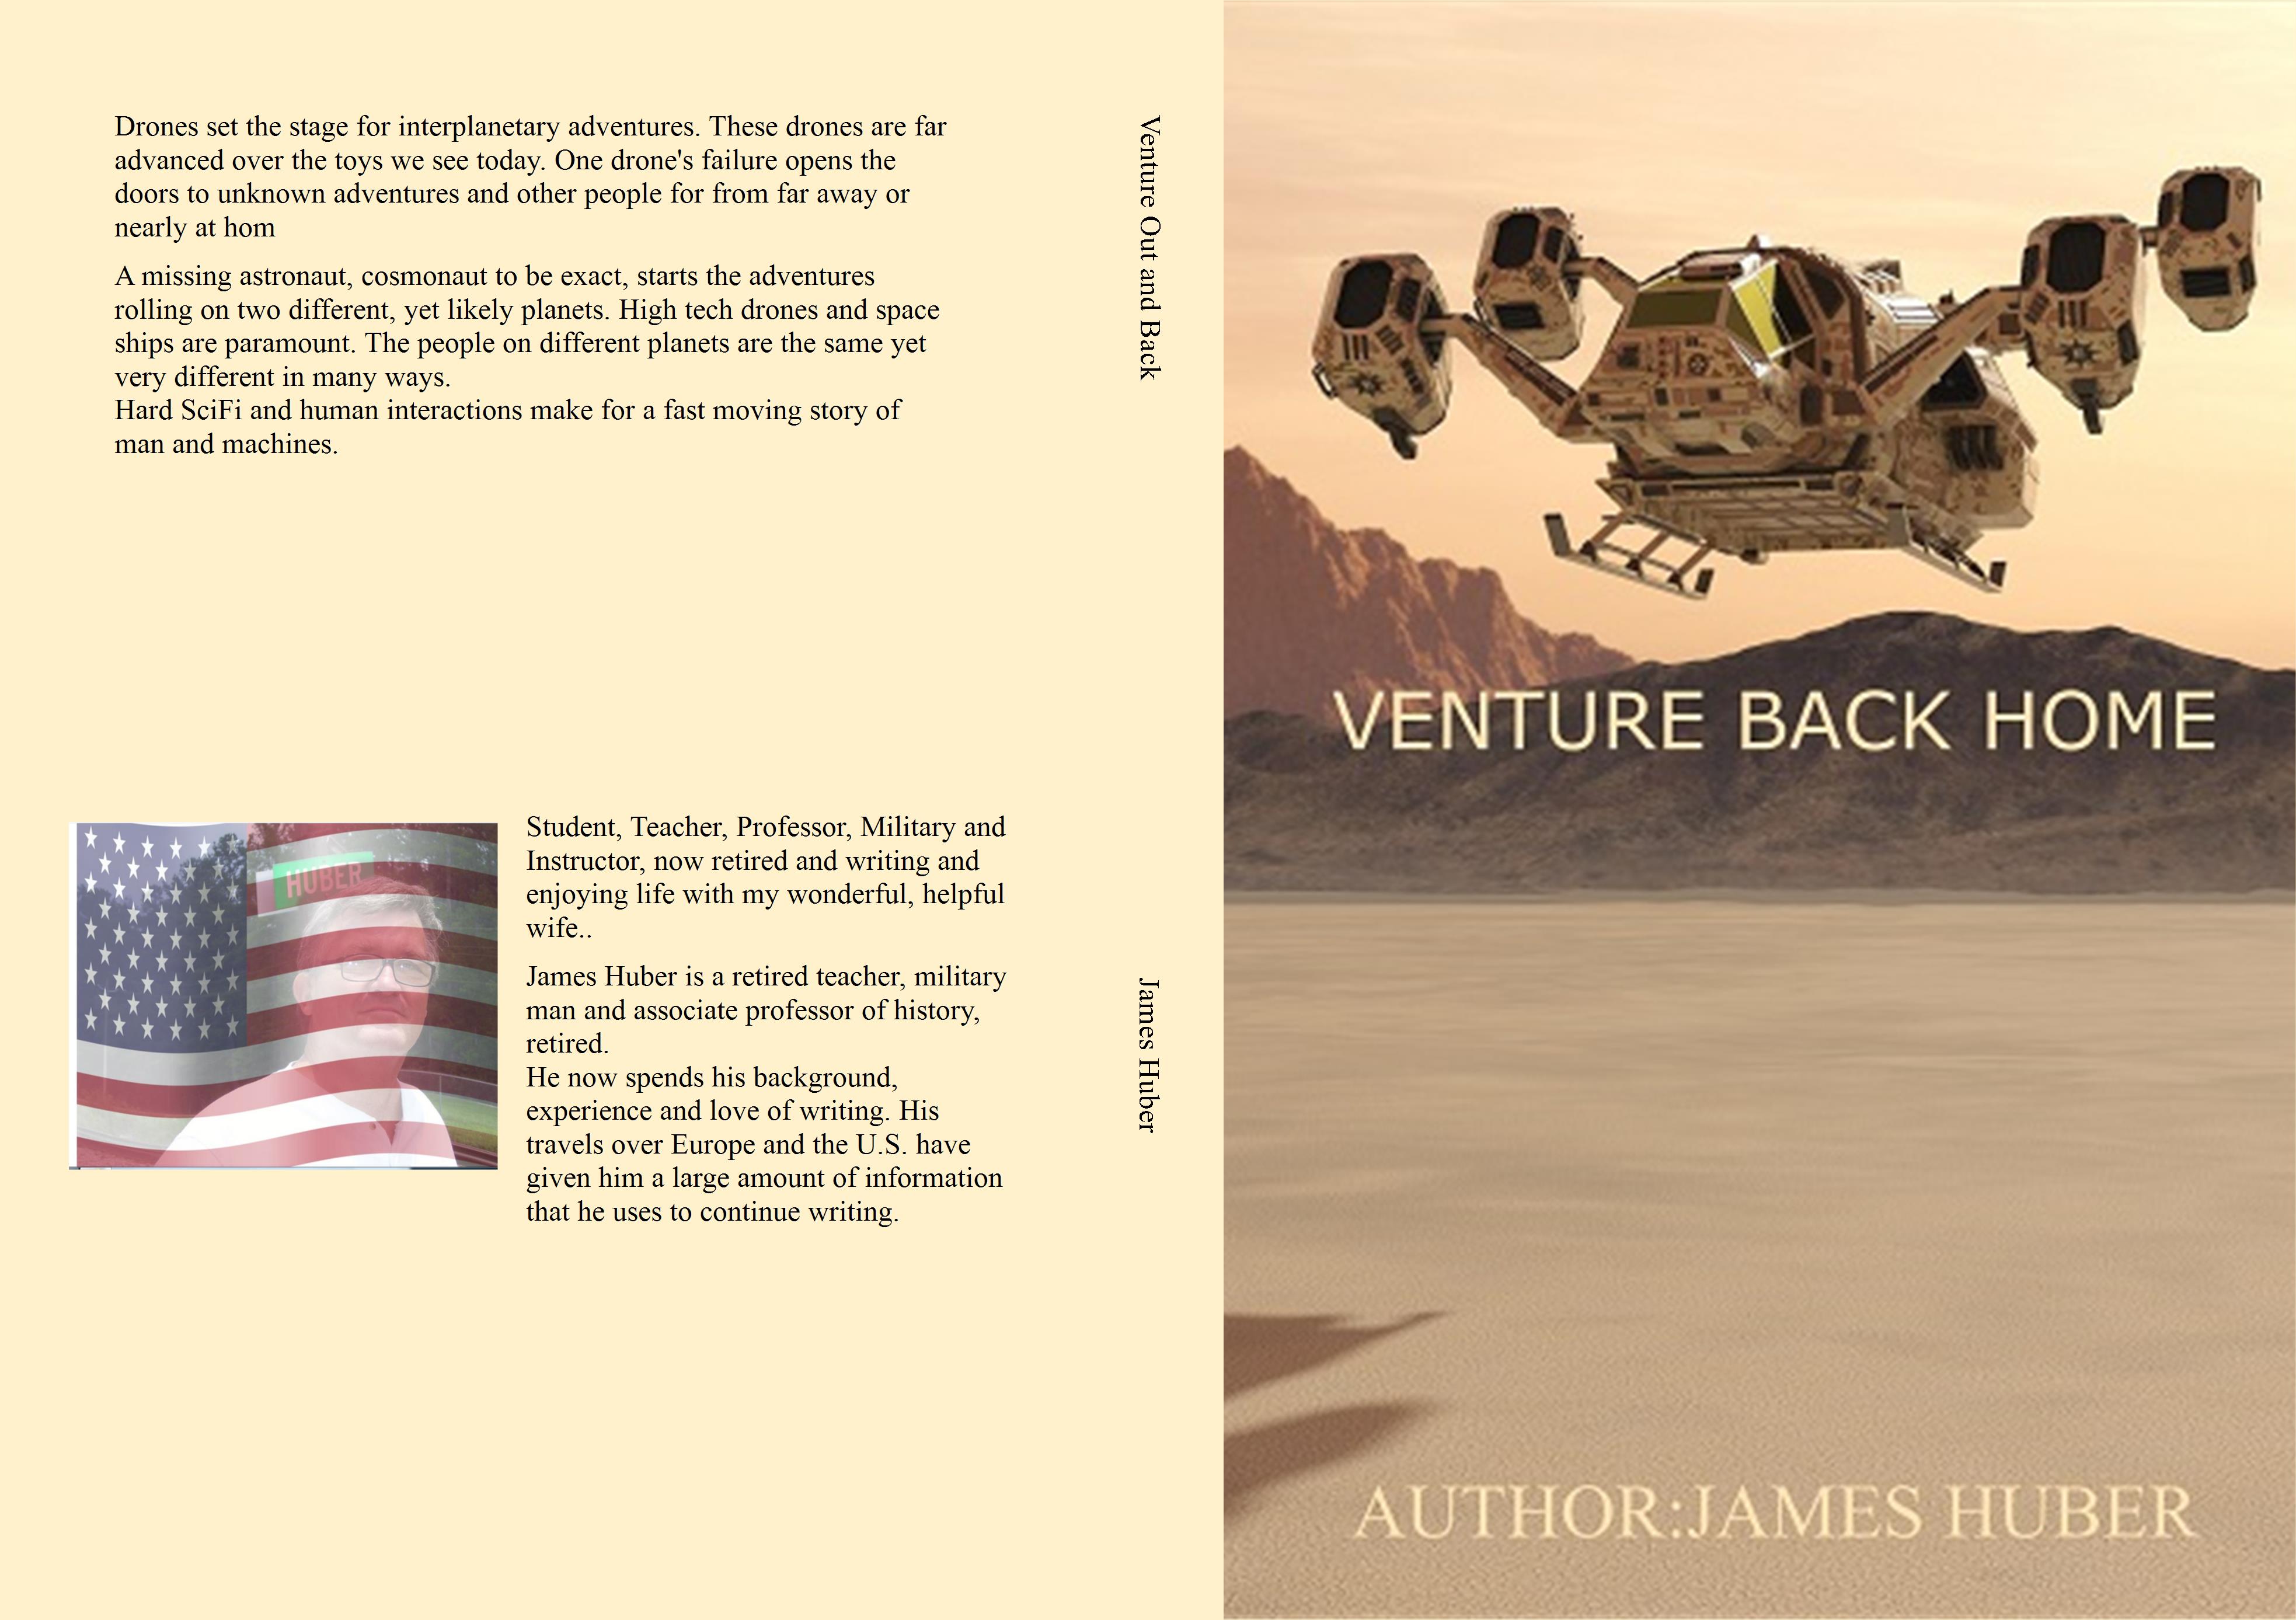 VENTURE BACK HOME cover image